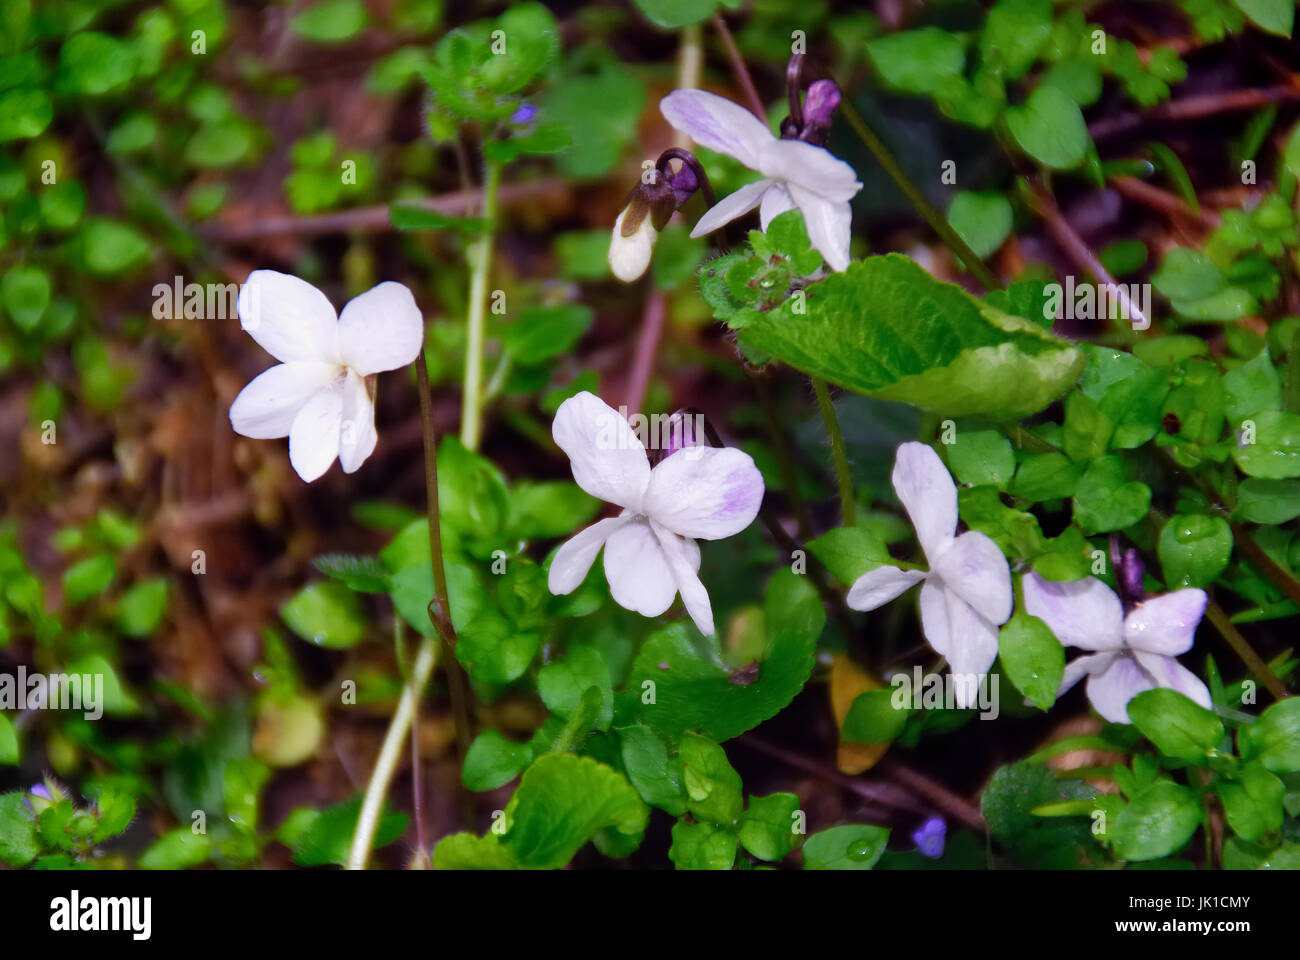 Asiago Plateau, Veneto, Italy. White violets in a broadleaf forest. Stock Photo